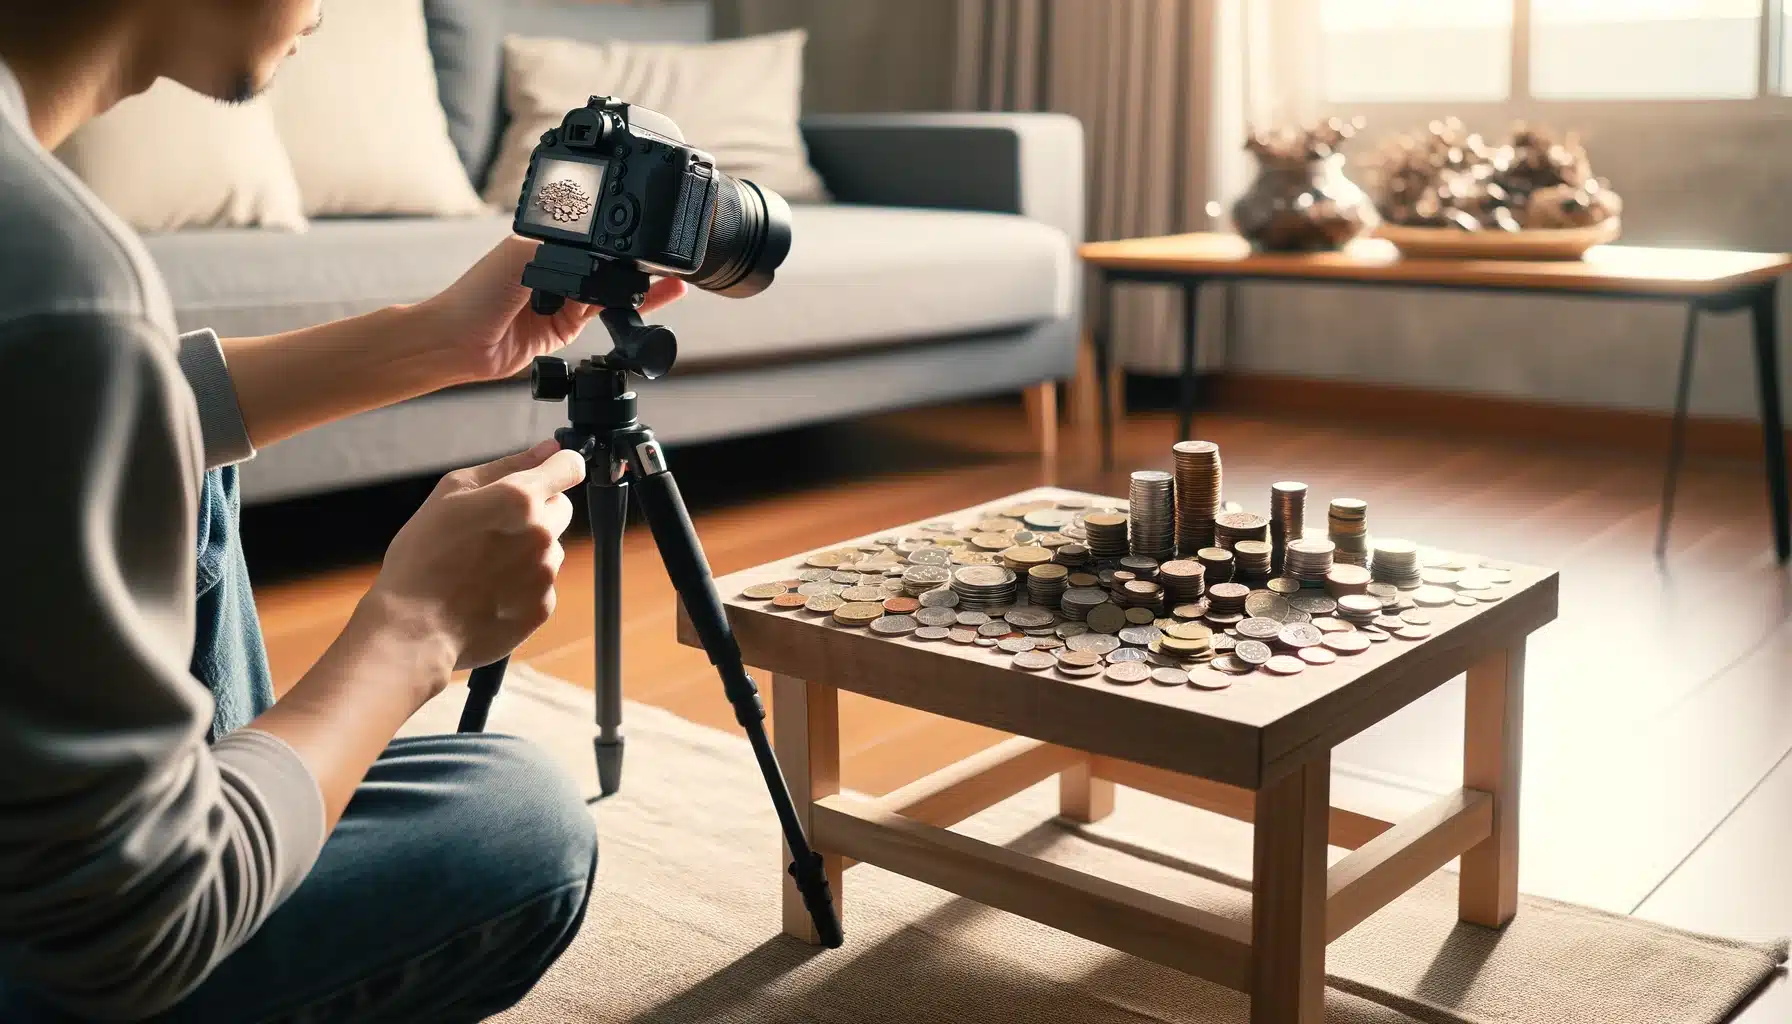 Person setting up a mini photography studio at home with coins as the subject